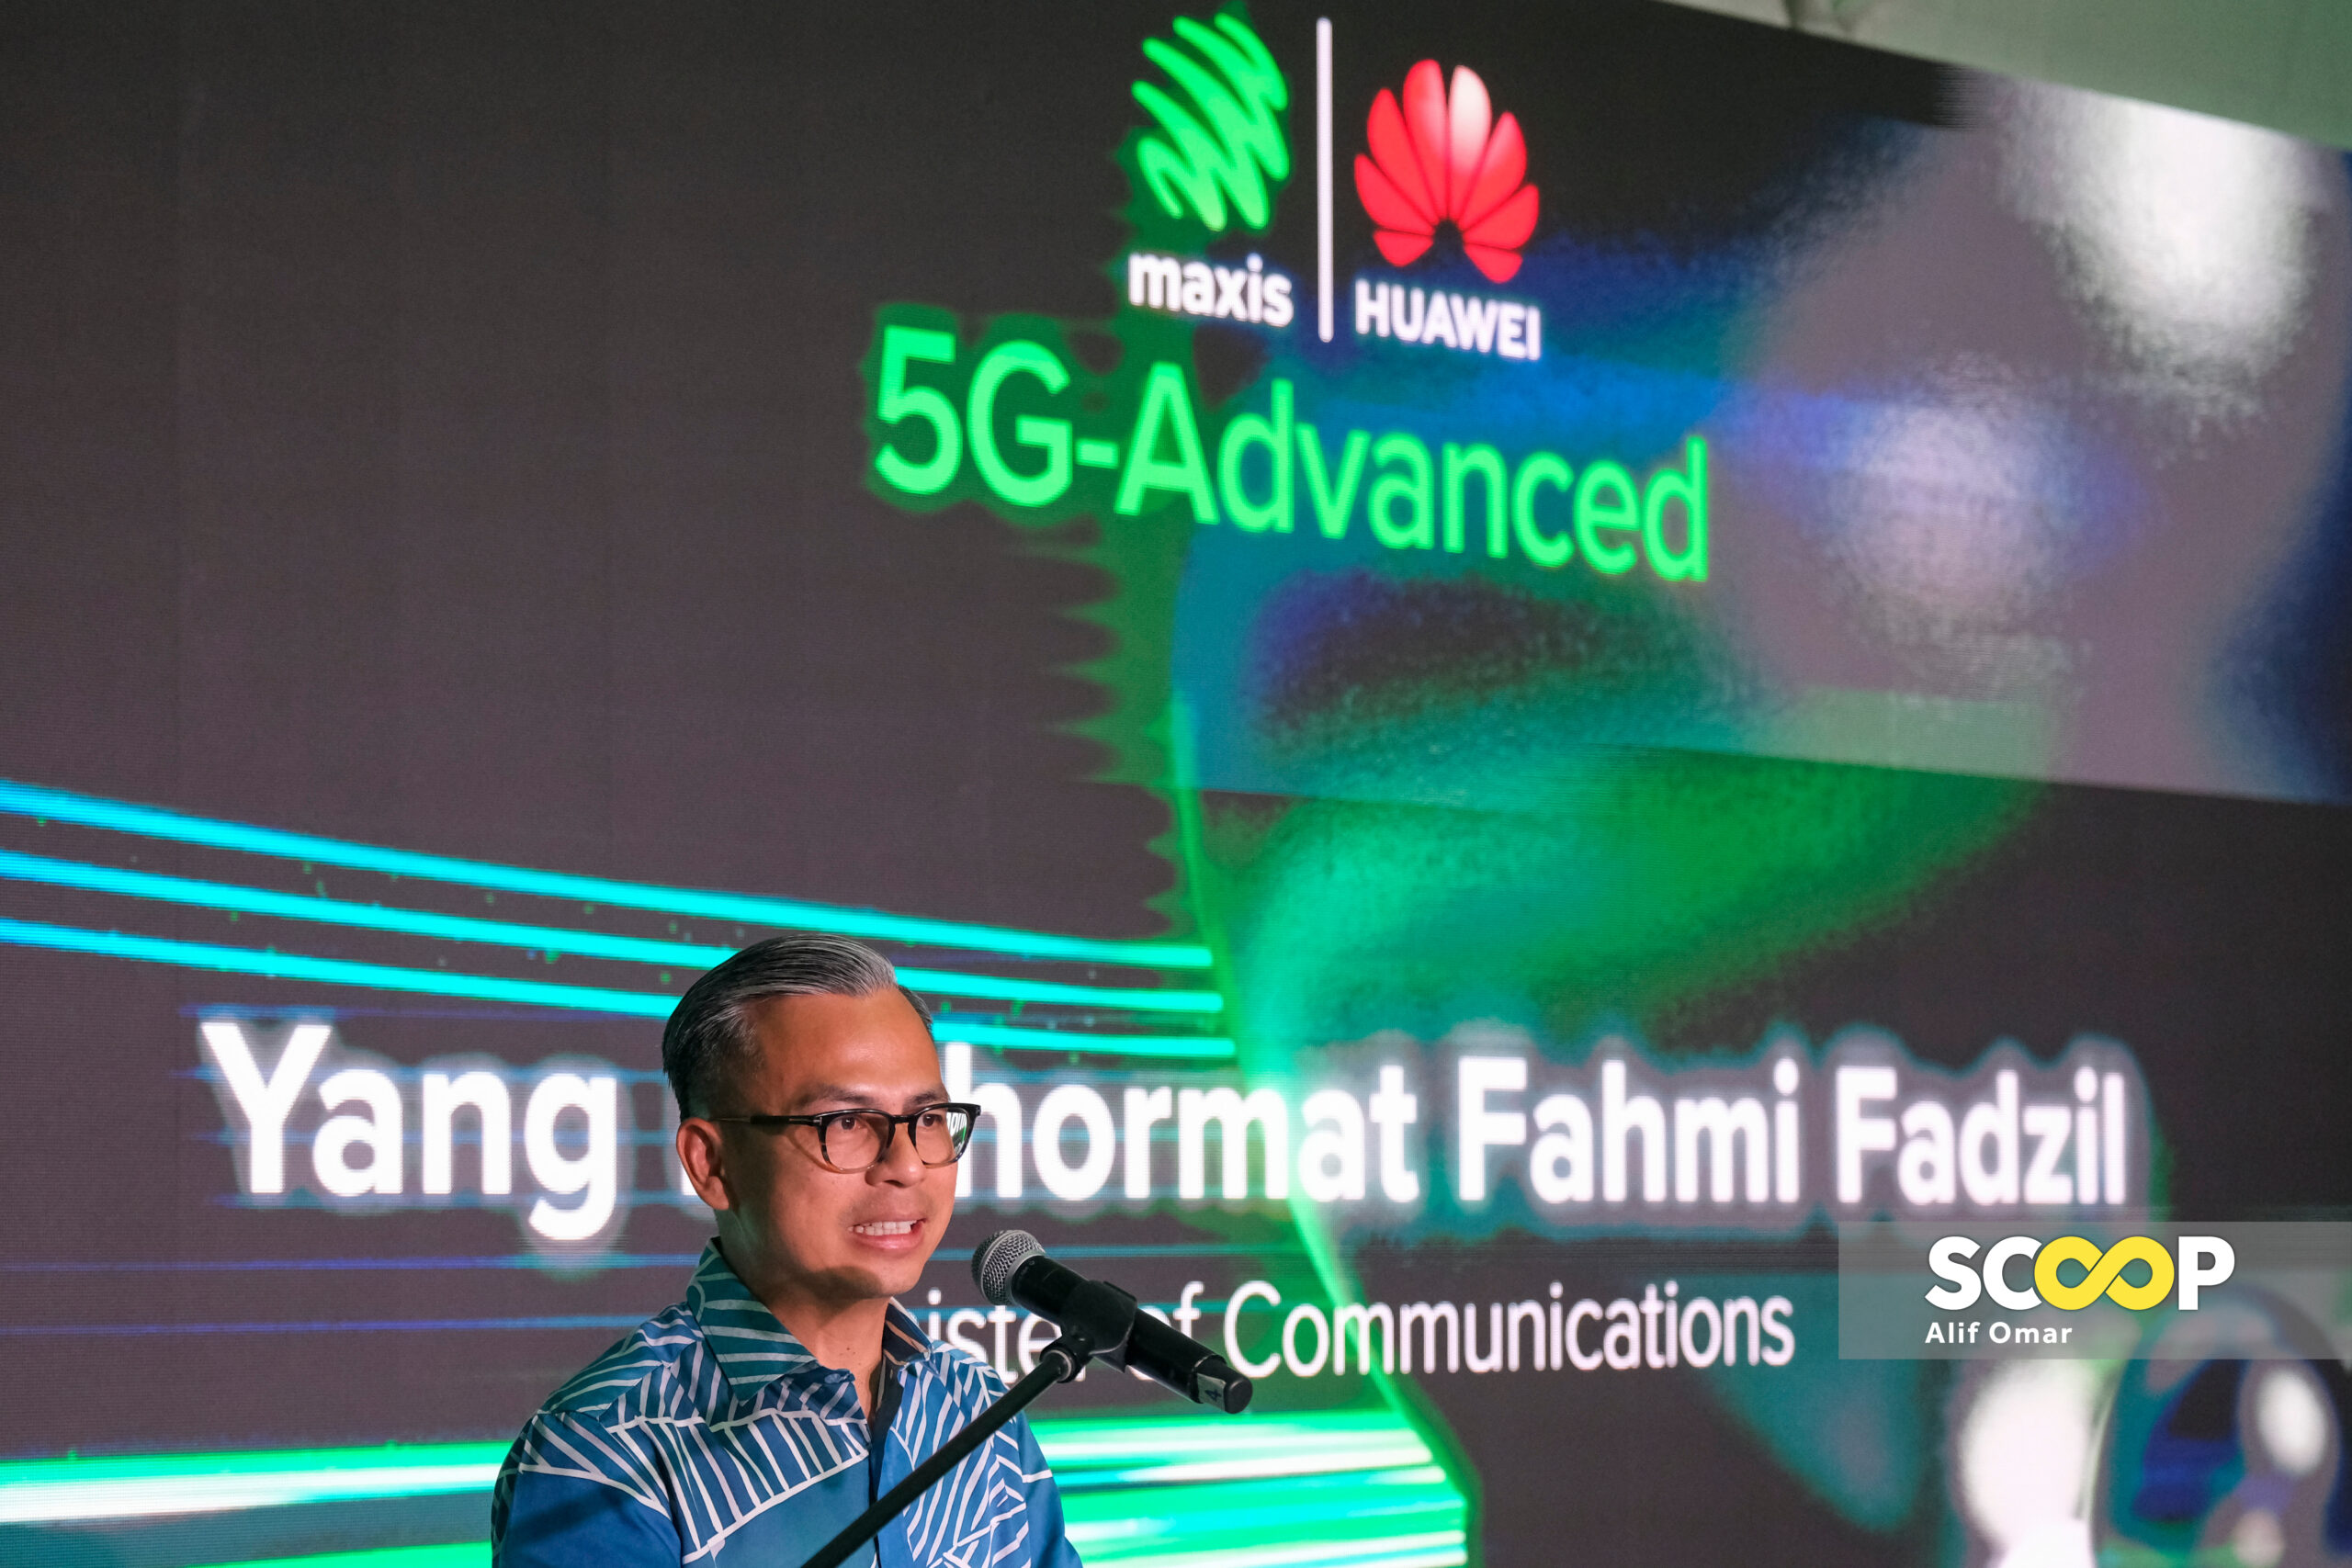 [UPDATED] Nearly 30% of Malaysians have adopted the use of the 5G network: Fahmi